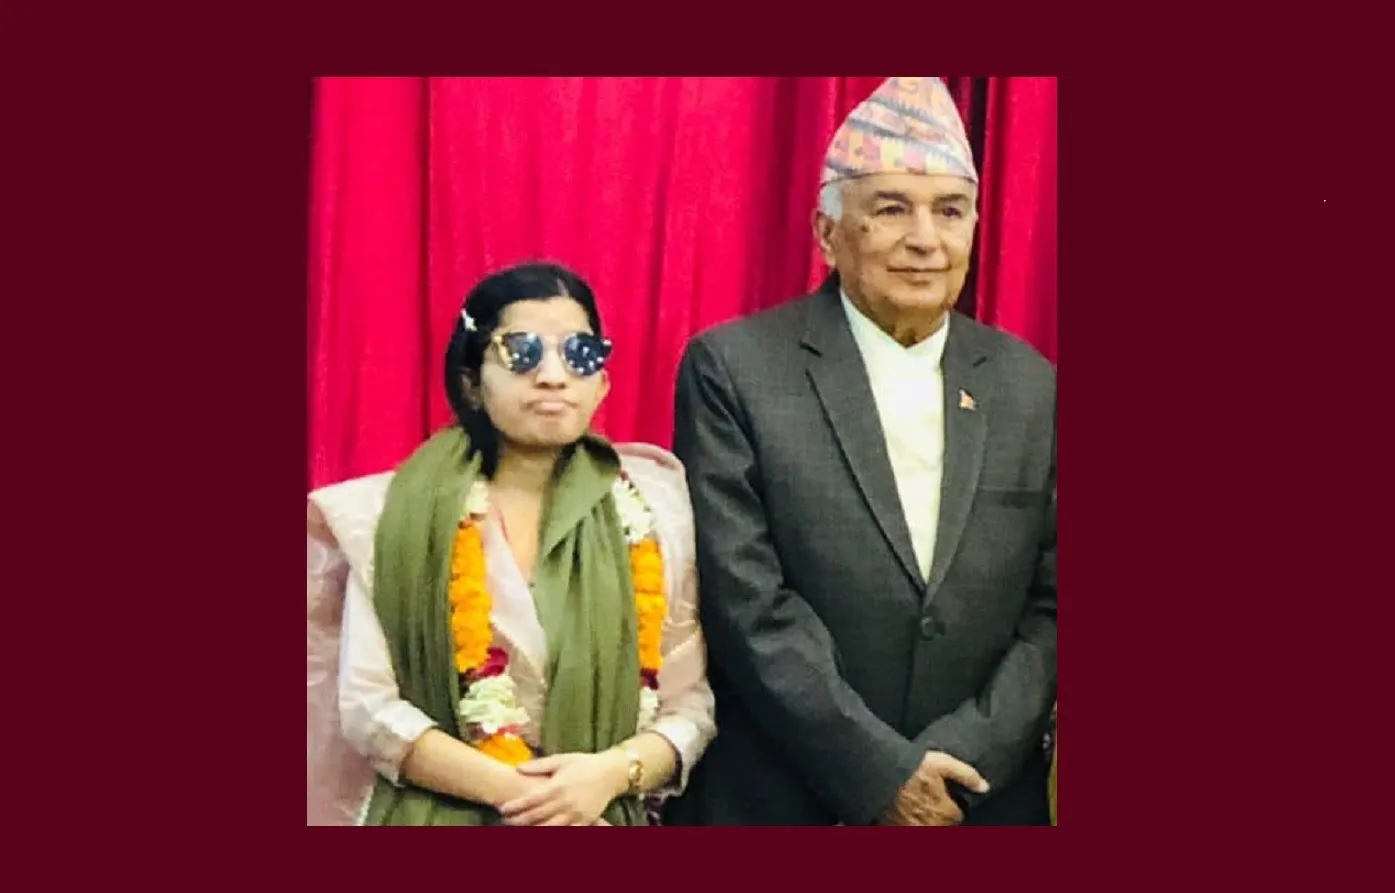 President Paudel honors singer Menuka Poudel for her excellence in music industry